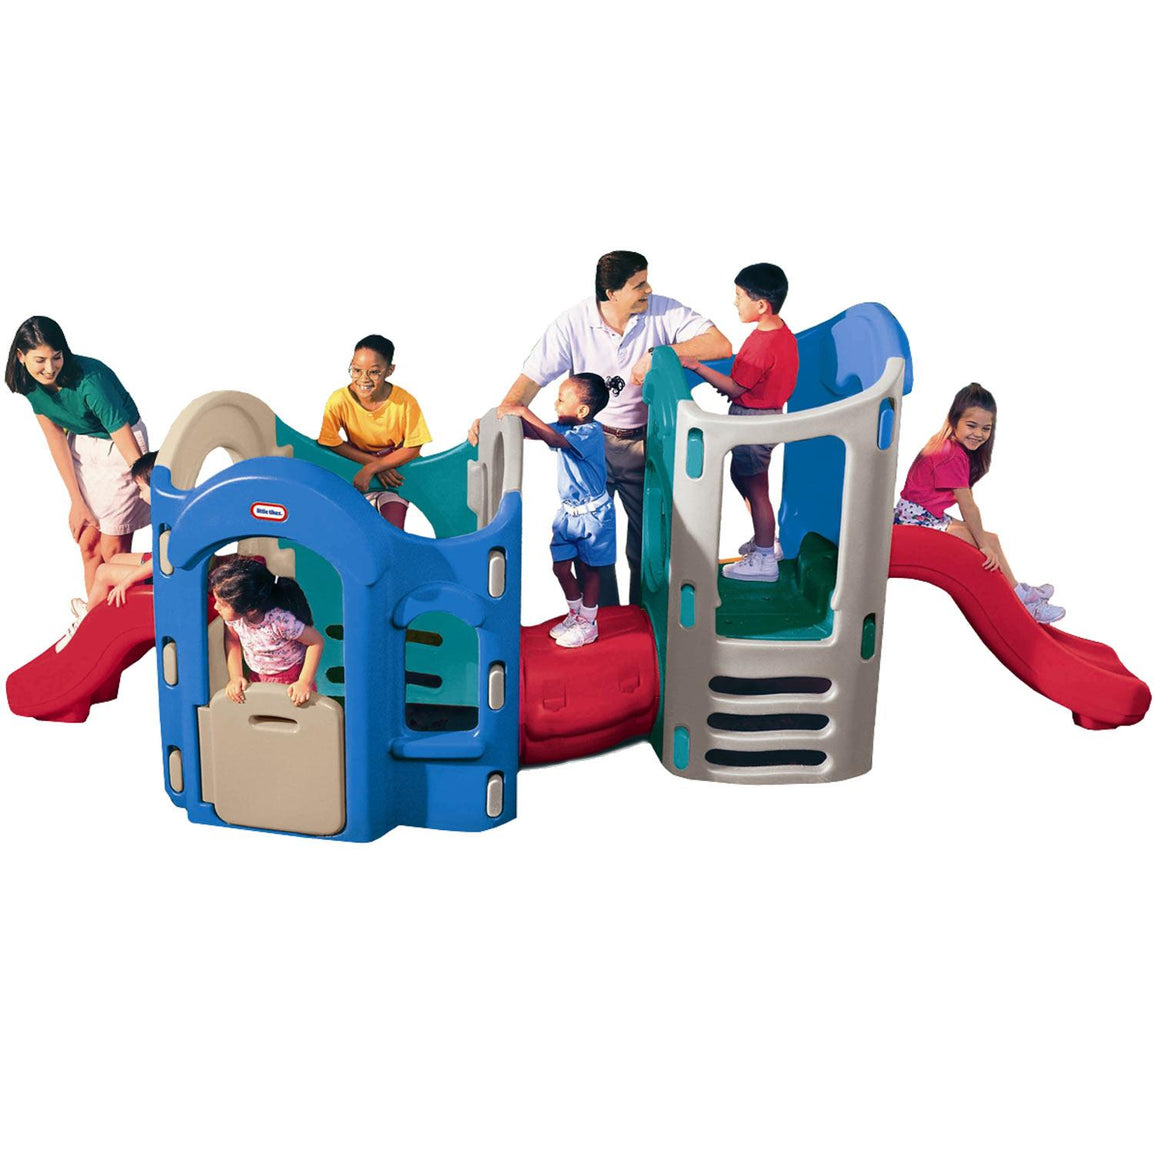 8-in-1 Adjustable Playground - Official Little Tikes Website